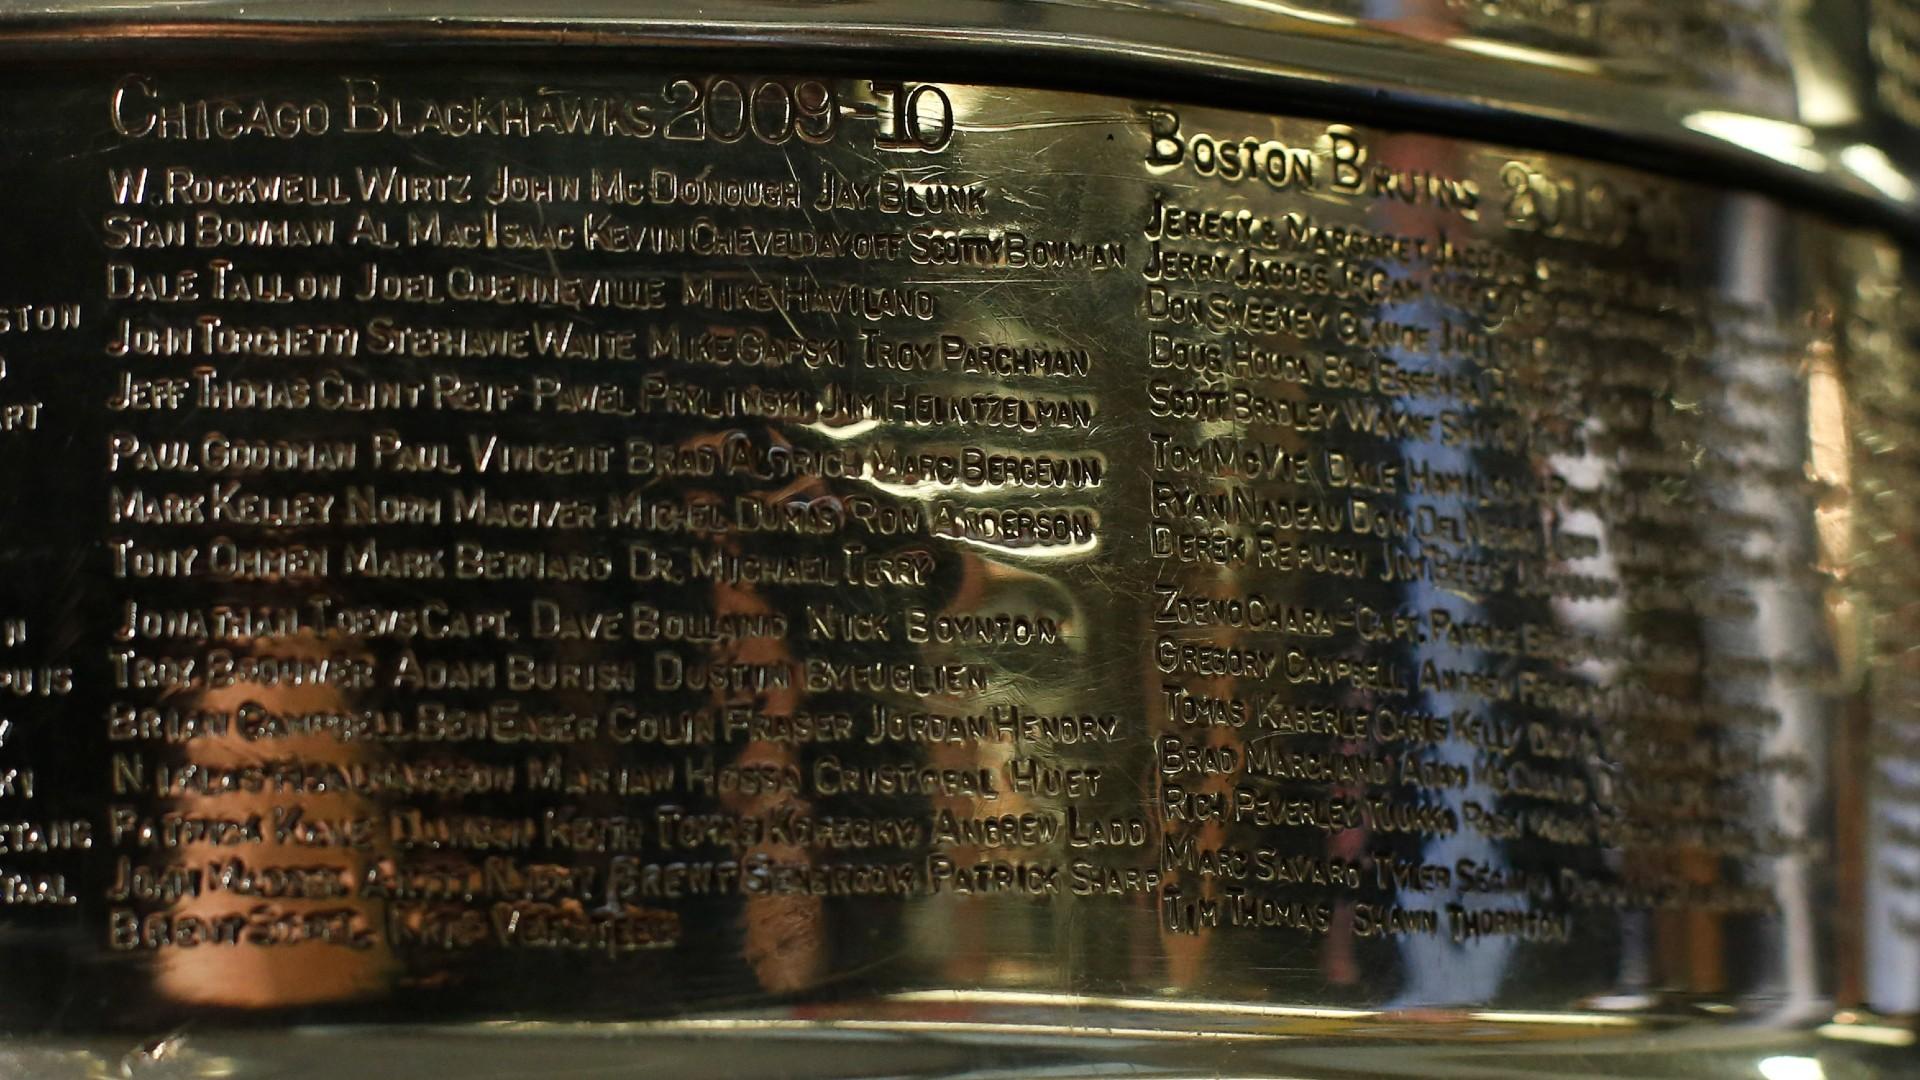 The names of the 2010 Stanley Cup Champion Chicago Blackhawks, left, are displayed on the Stanley Cup in the lobby of the United Center during an NHL hockey news conference on June 11, 2013 in Chicago. (AP Photo / Charles Rex Arbogast, File)